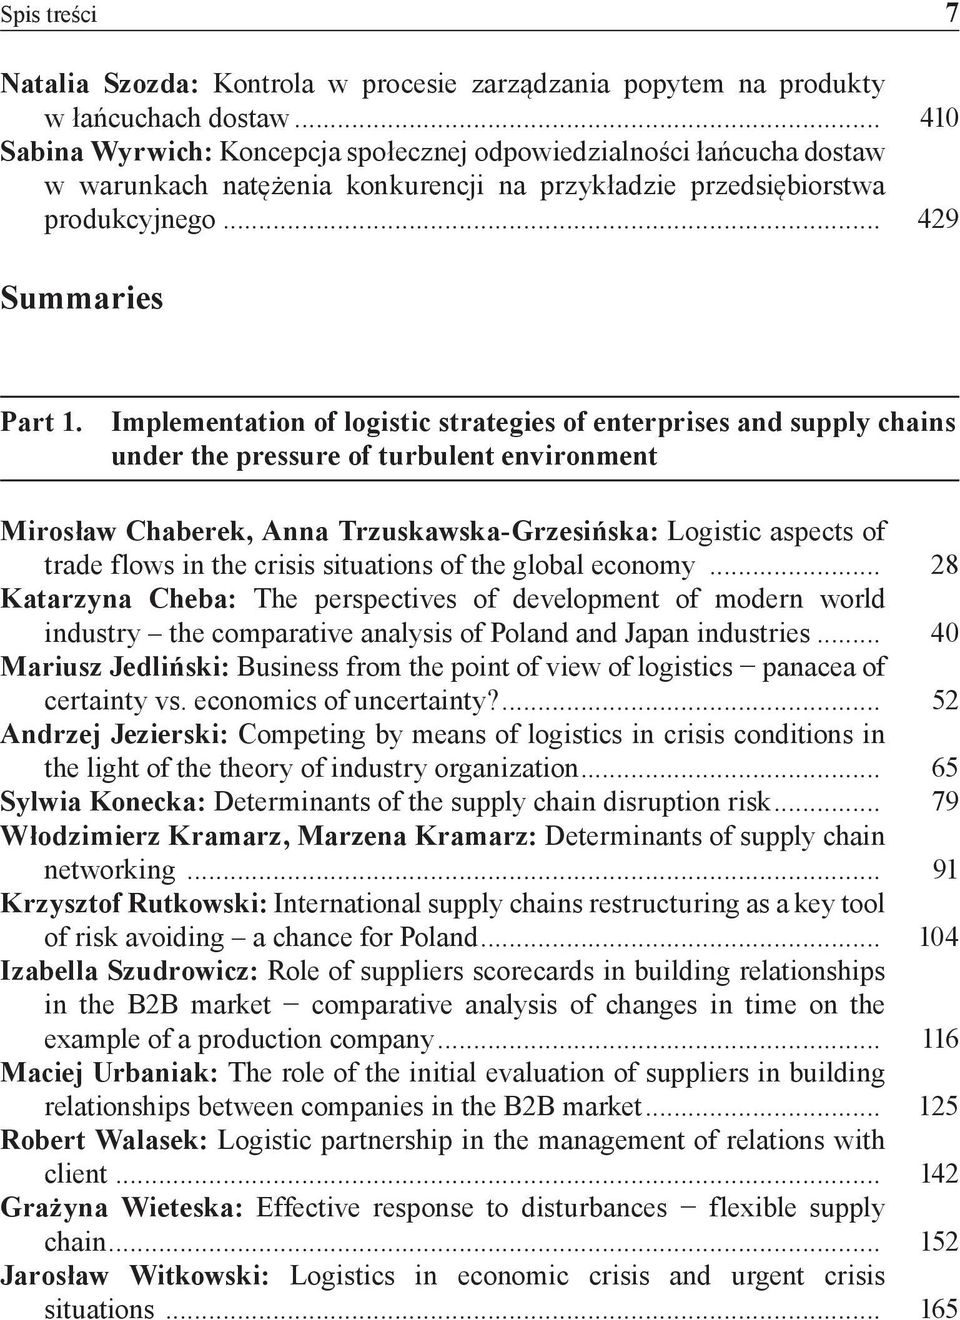 Implementation of logistic strategies of enterprises and supply chains under the pressure of turbulent environment Mirosław Chaberek, Anna Trzuskawska-Grzesińska: Logistic aspects of trade flows in